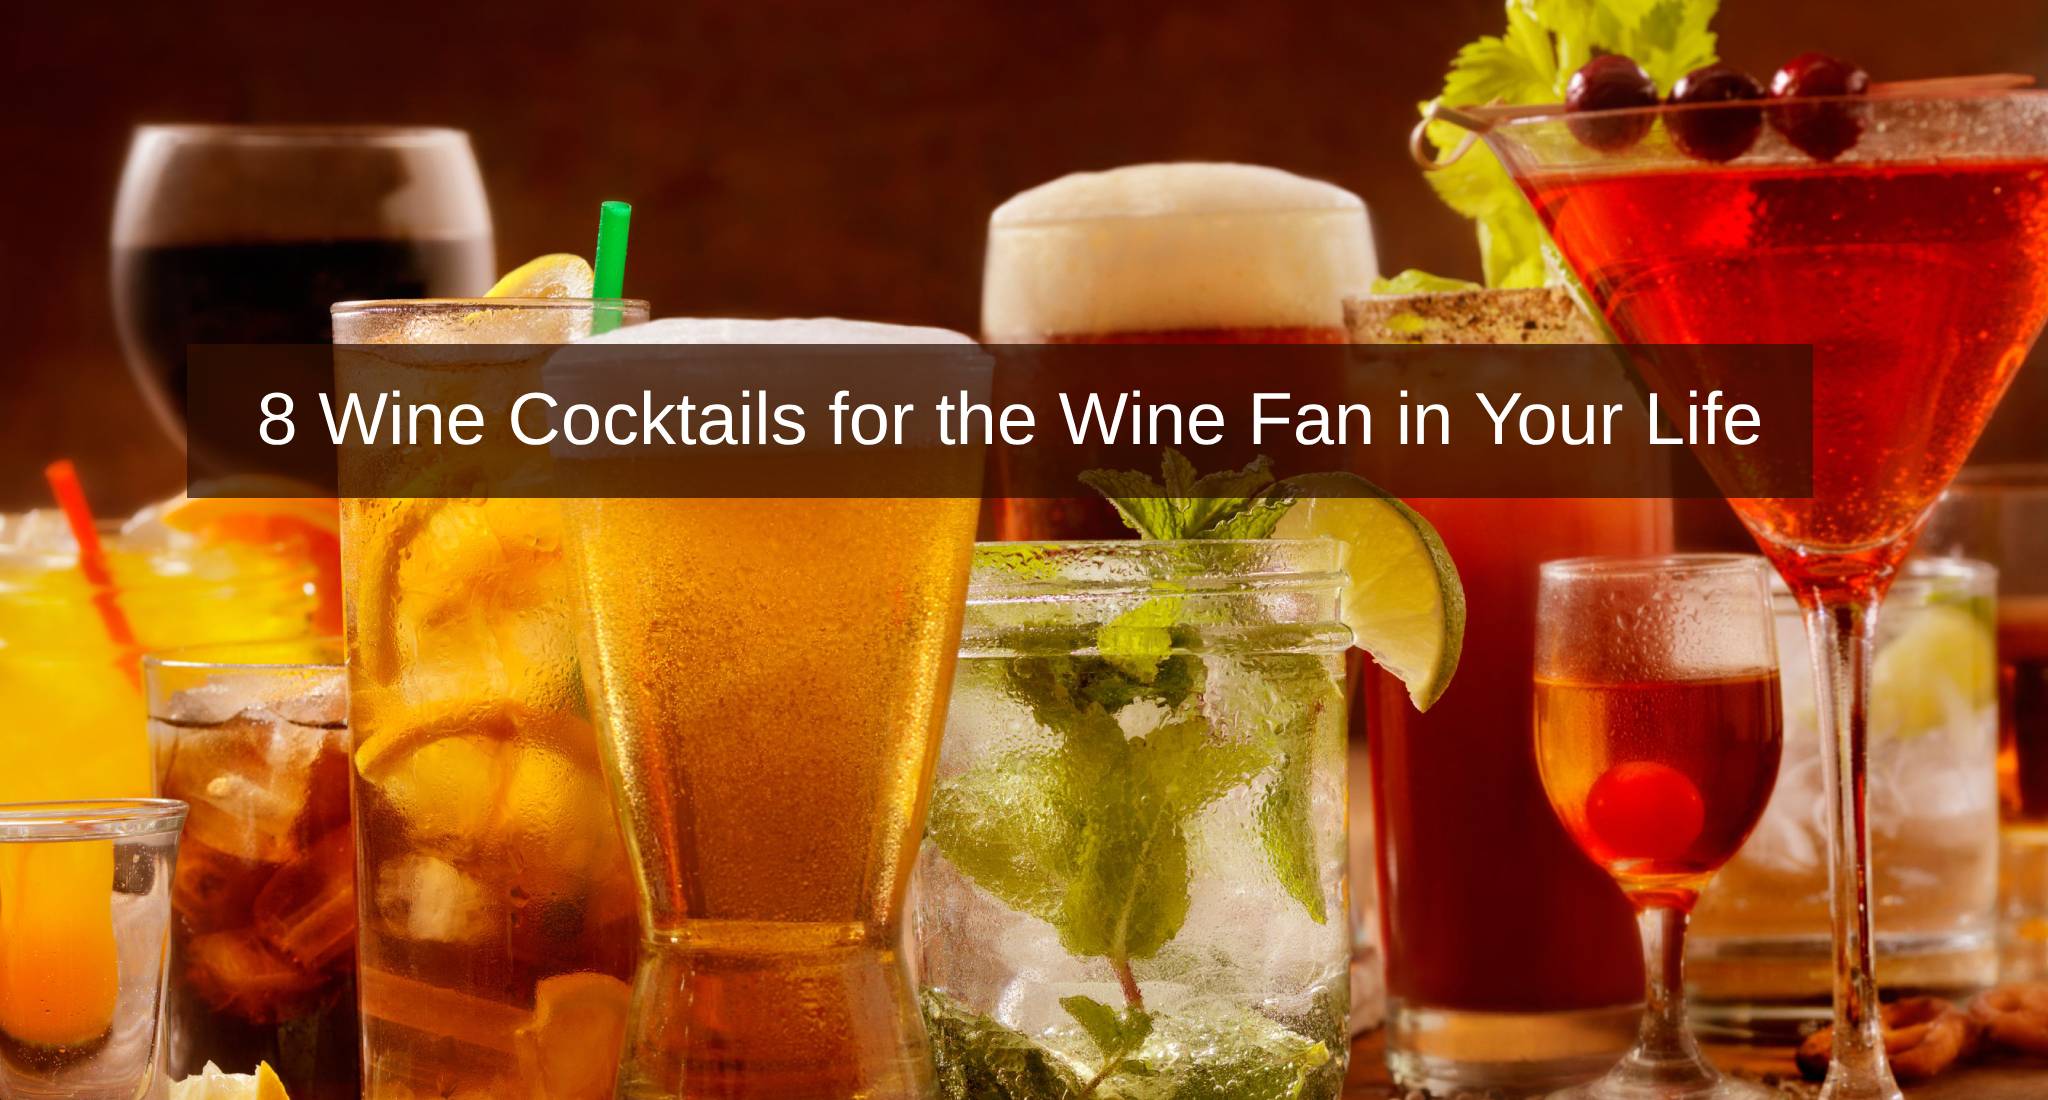 8 Wine Cocktails for the Wine Fan in Your Life